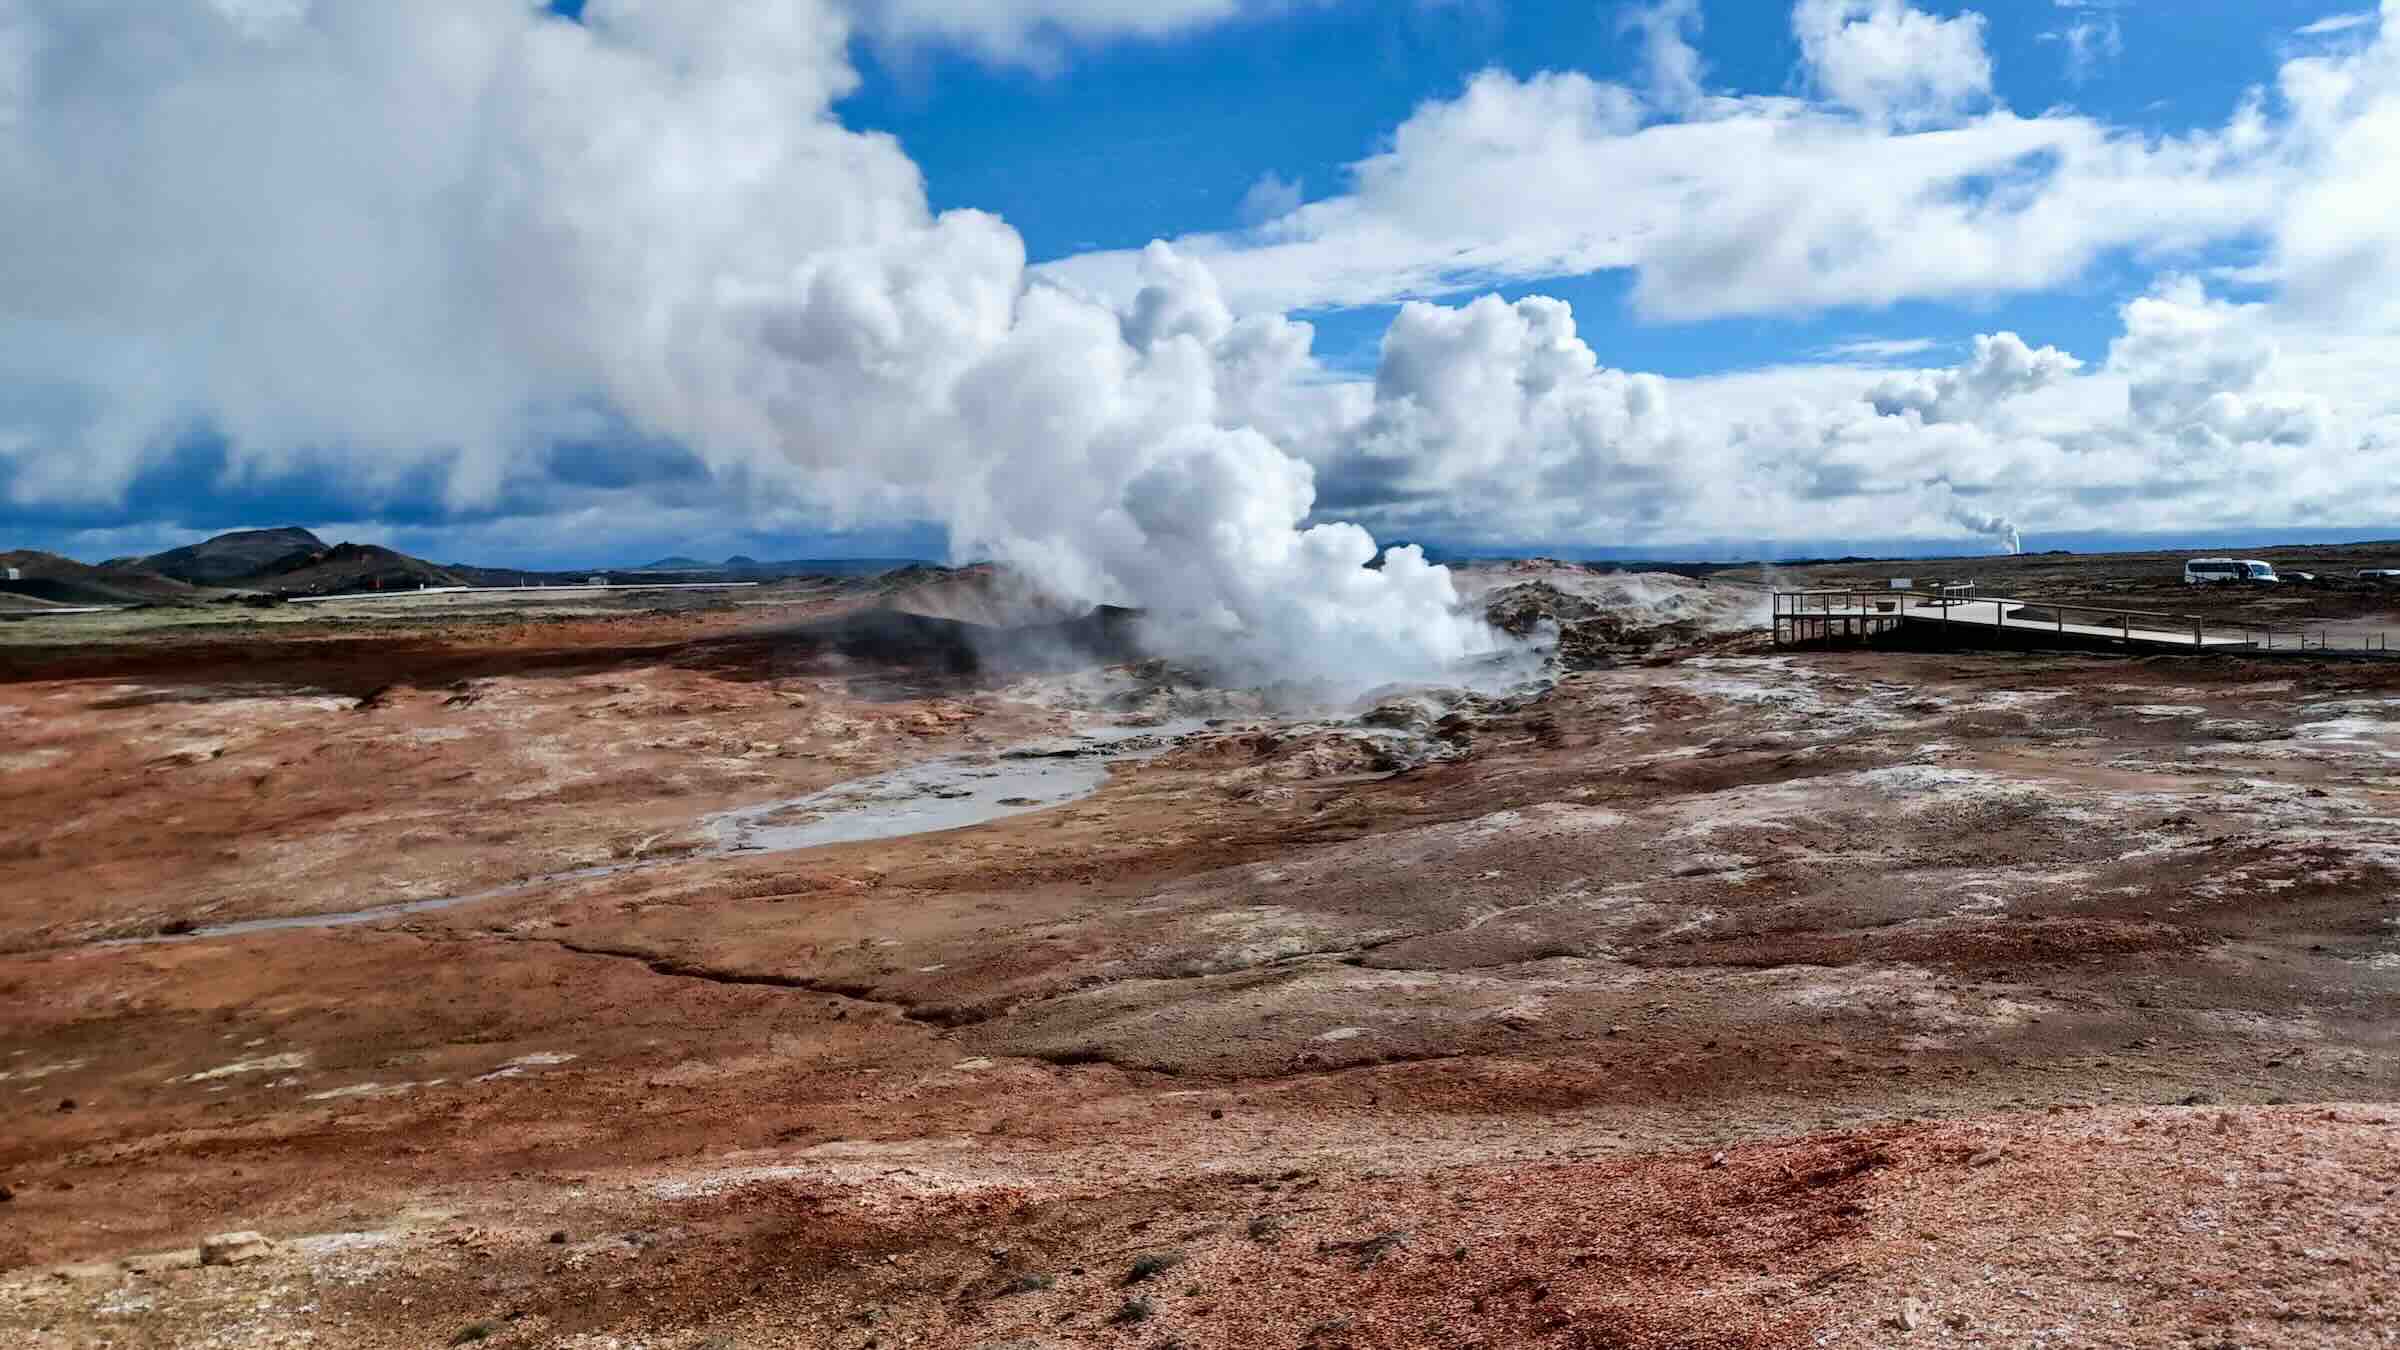 A Geothermal area in a barren landscape spewing steam from the ground.